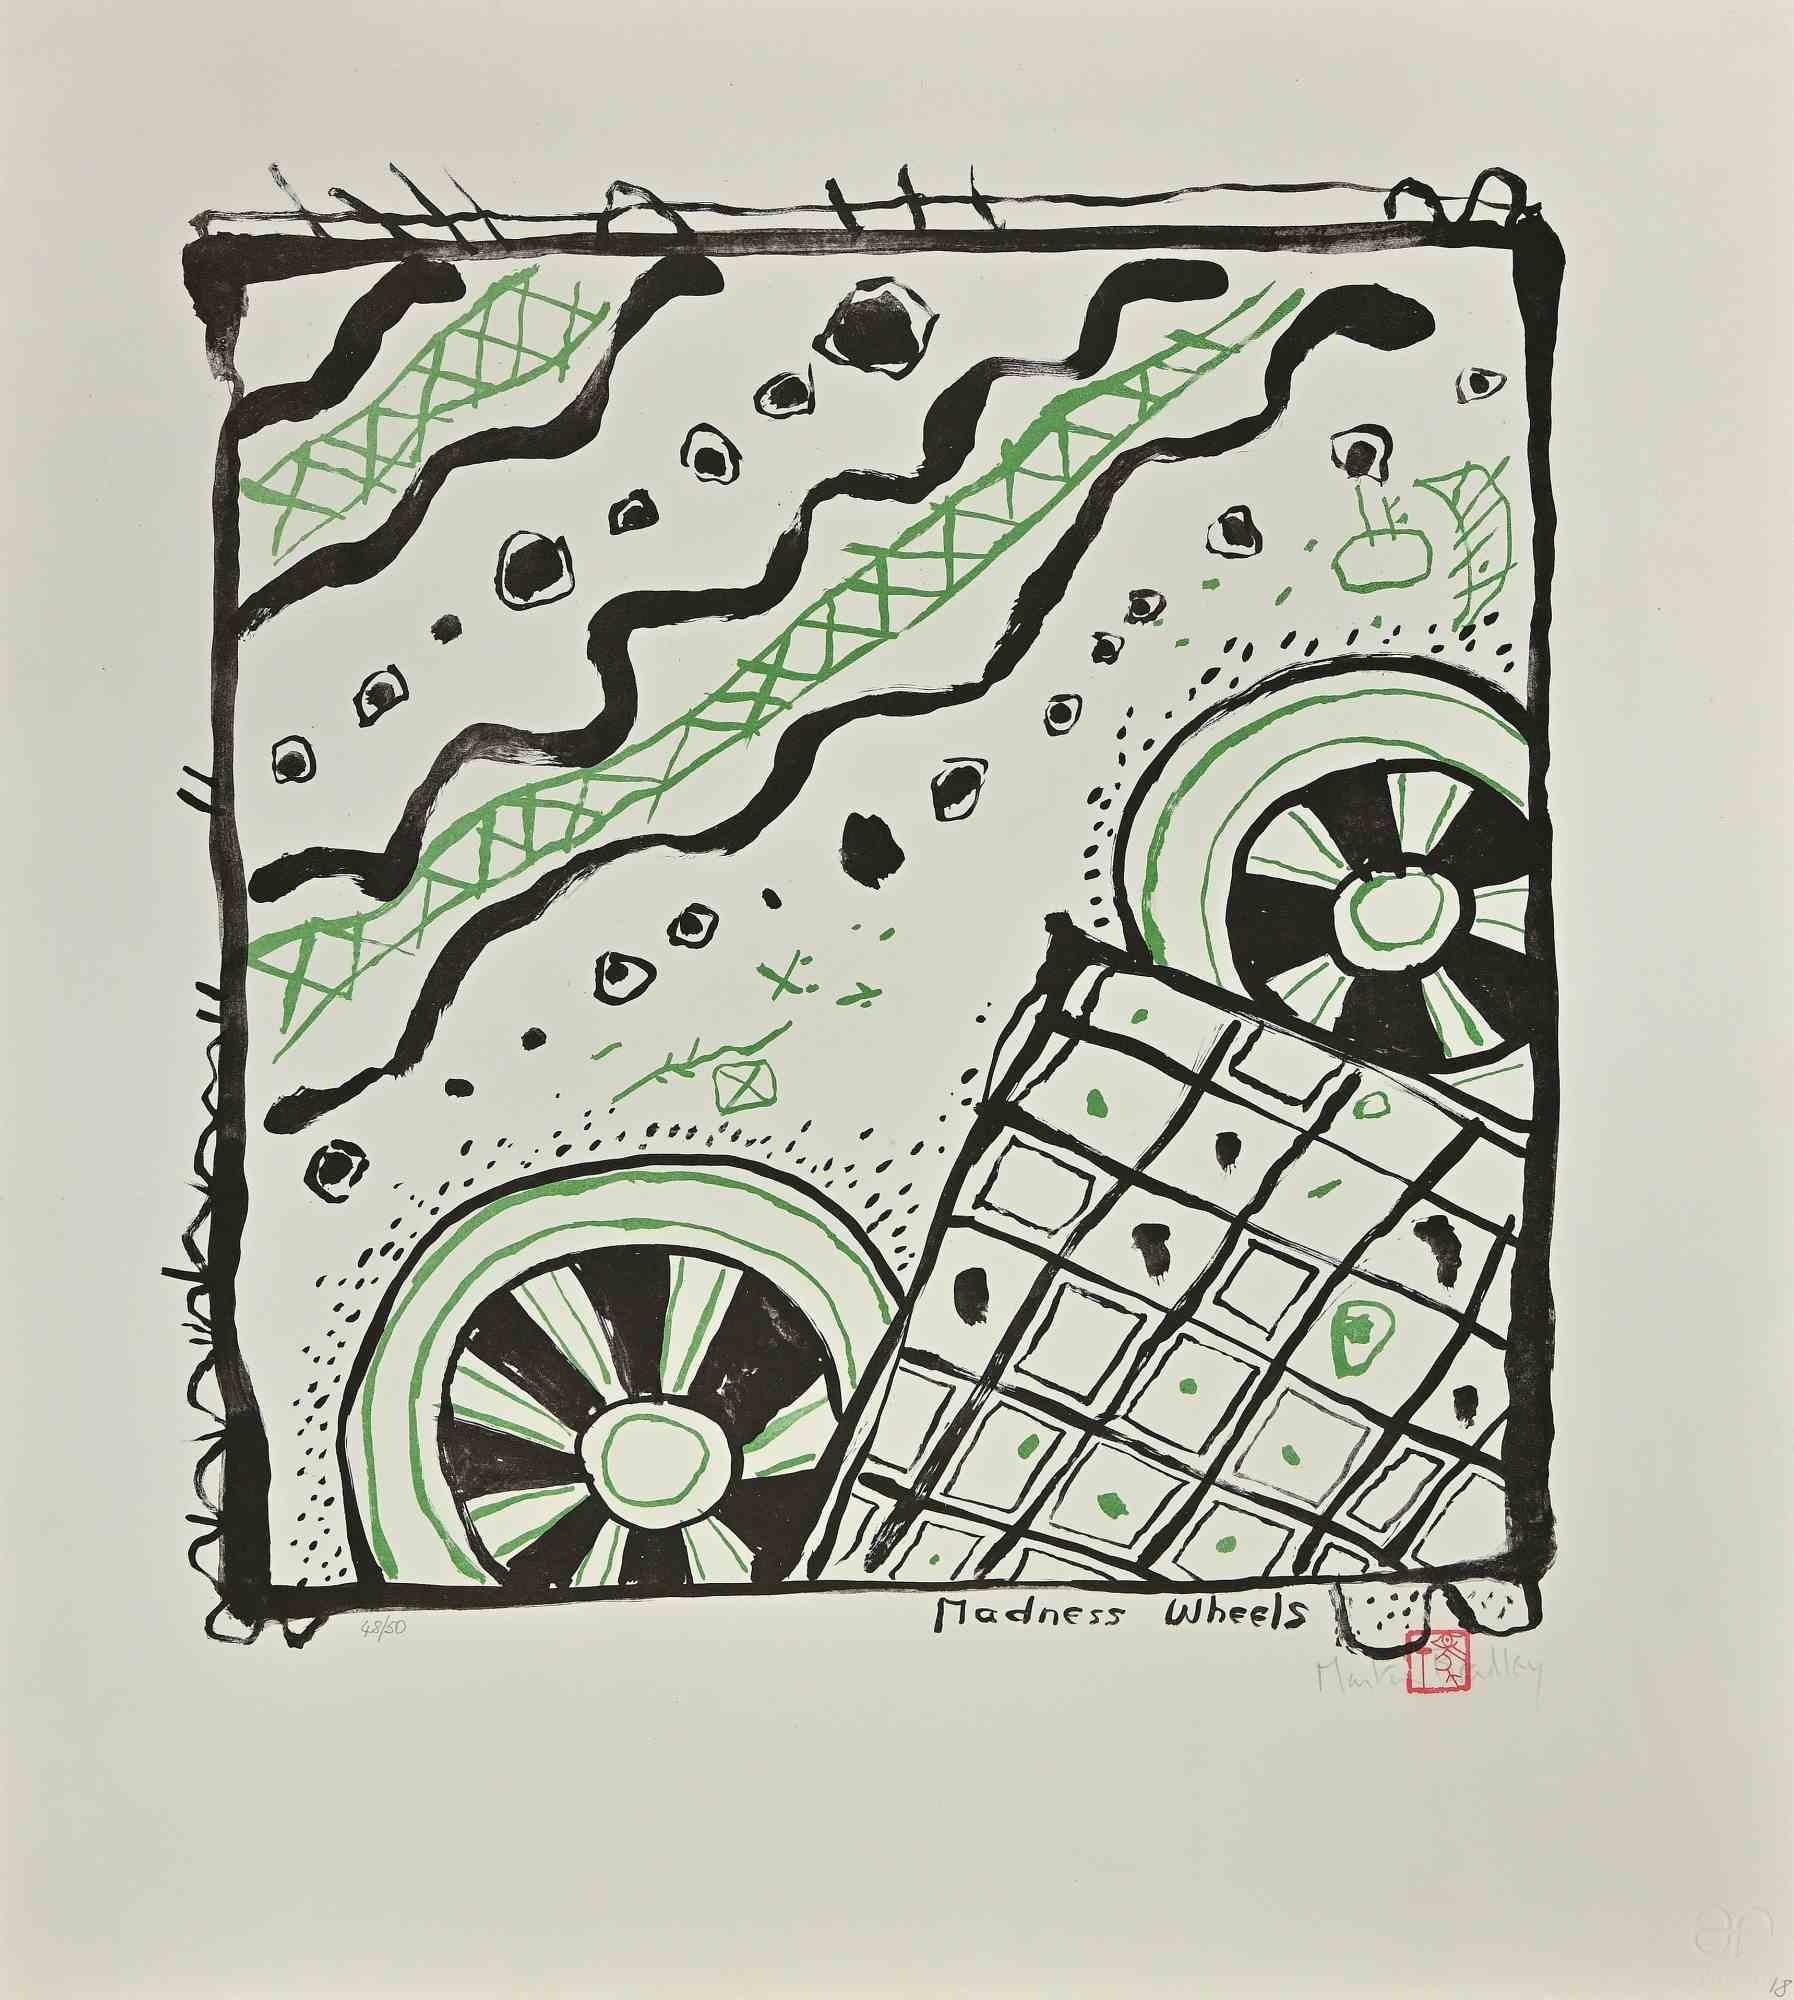 Madness Wheels is an artwork realized by the English artist Martin Bradley.

Lithograph on paper, hand-signed, titled on the lower right corner "Madness Wheels",  "Martin Bradley", numbered on the left margin ex. 48/50.

Good conditions.

Martin